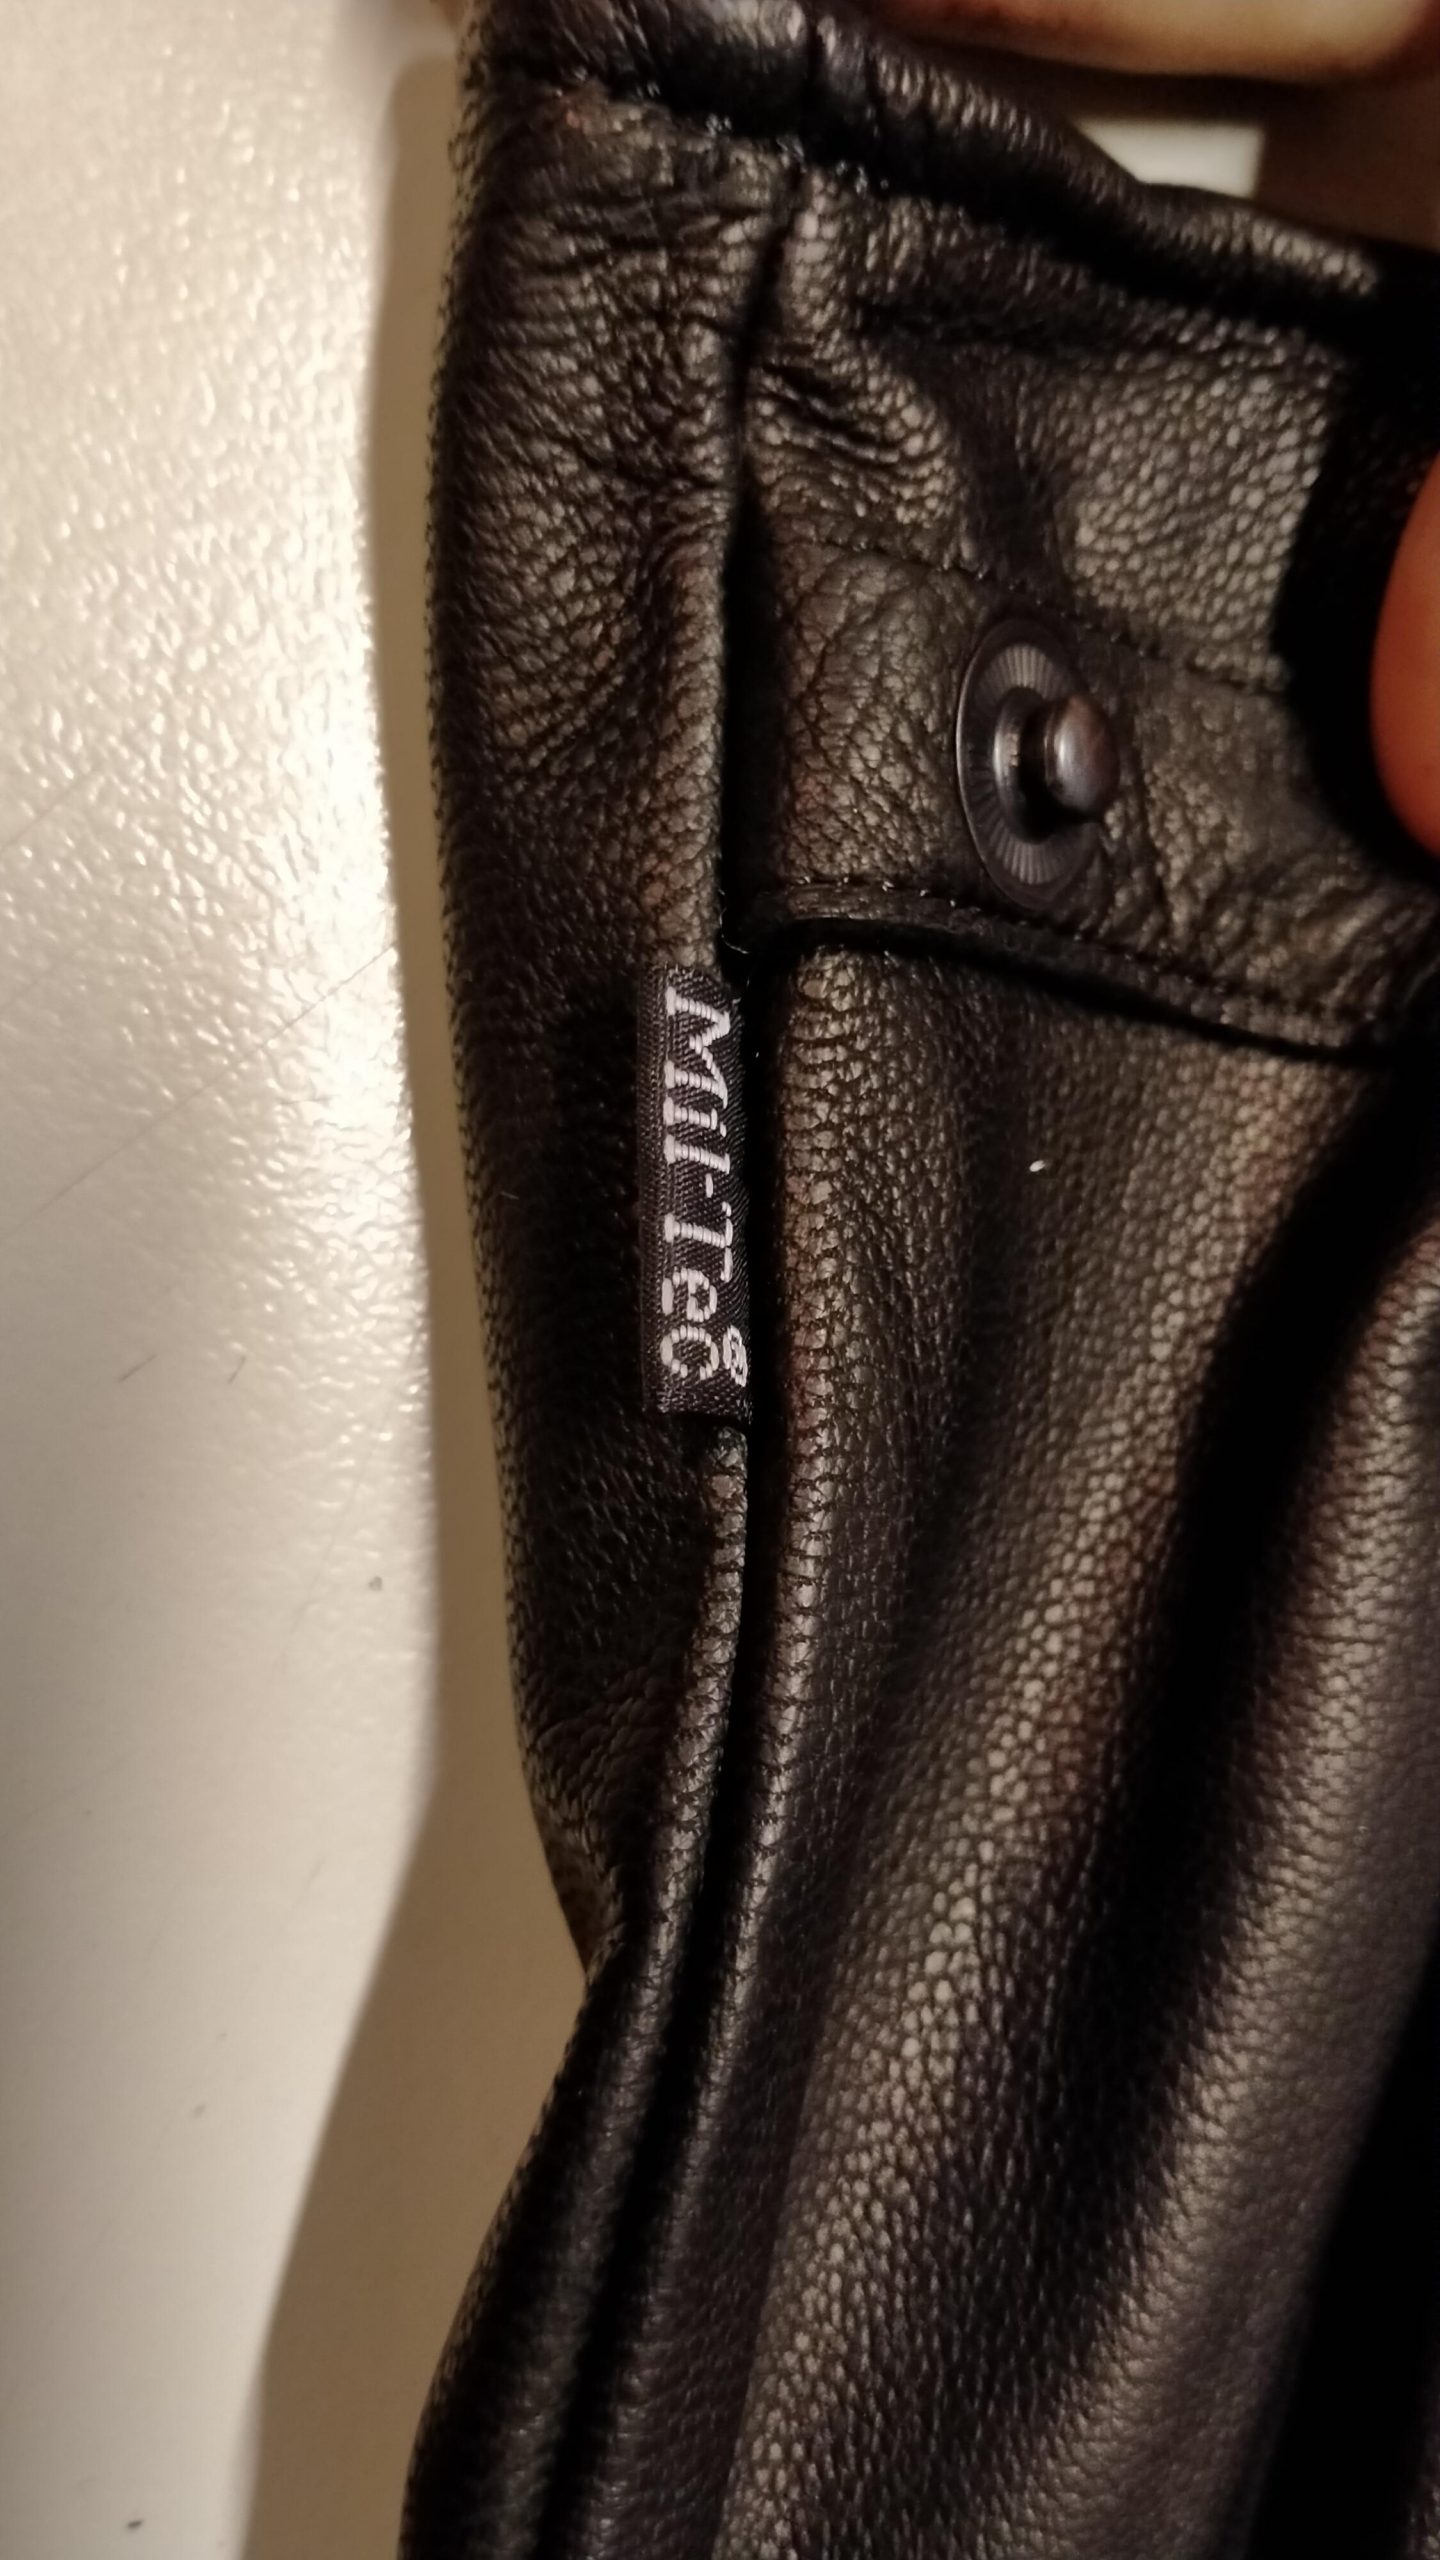 How to remove tag without damaging leather glove?